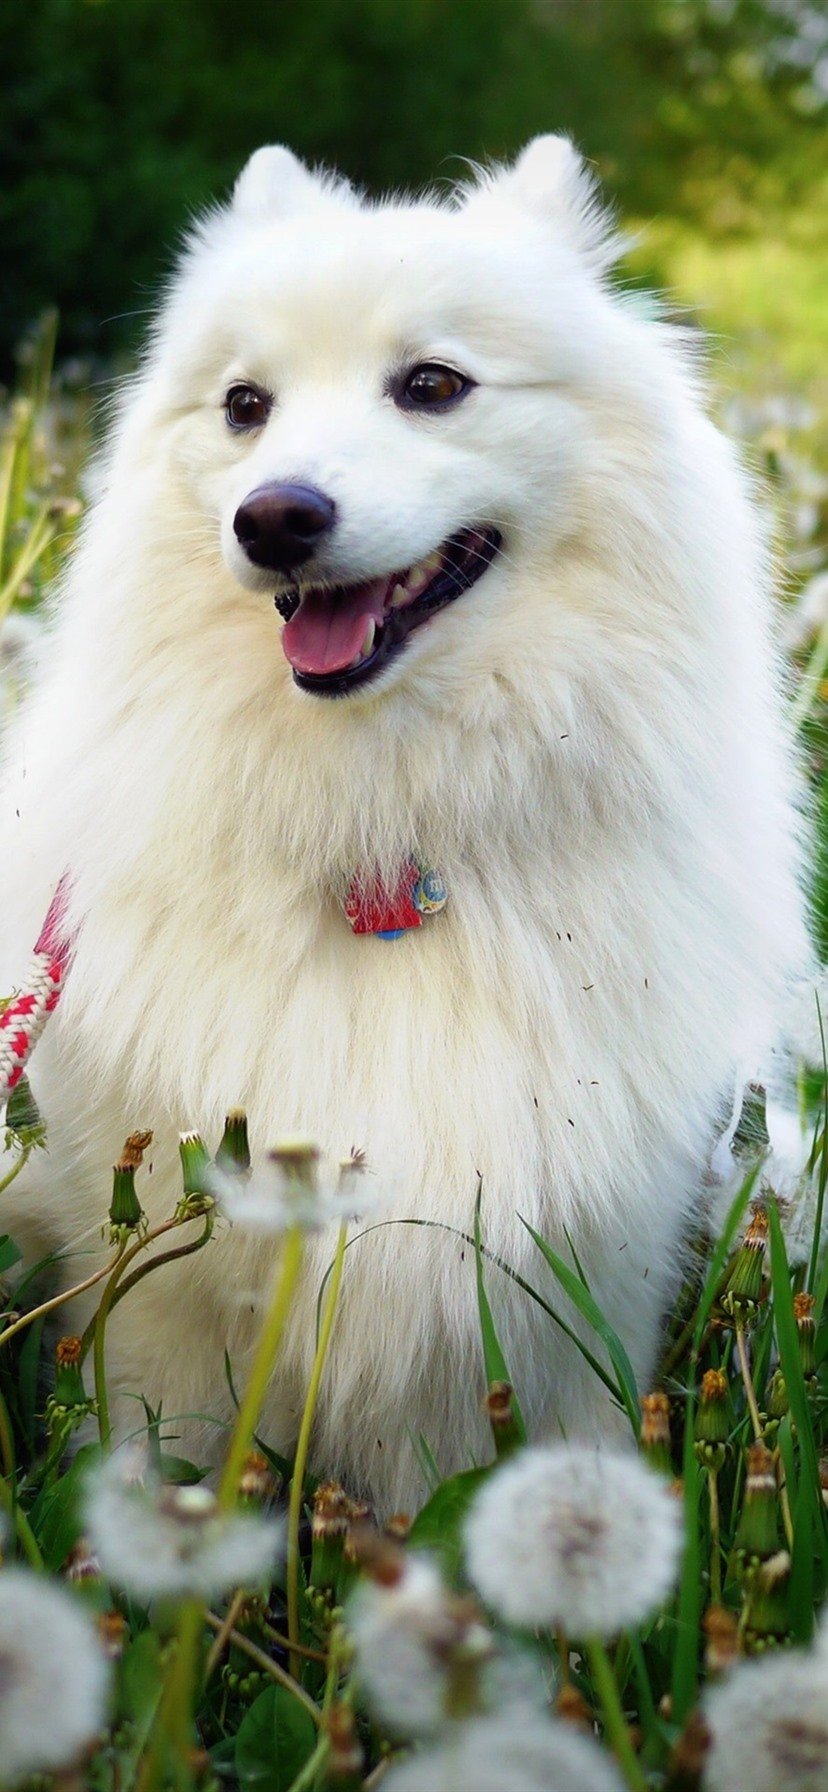 White Dog, Dandelions Flowers, Summer 1080x1920 IPhone 8 7 6 6S Plus Wallpaper, Background, Picture, Image